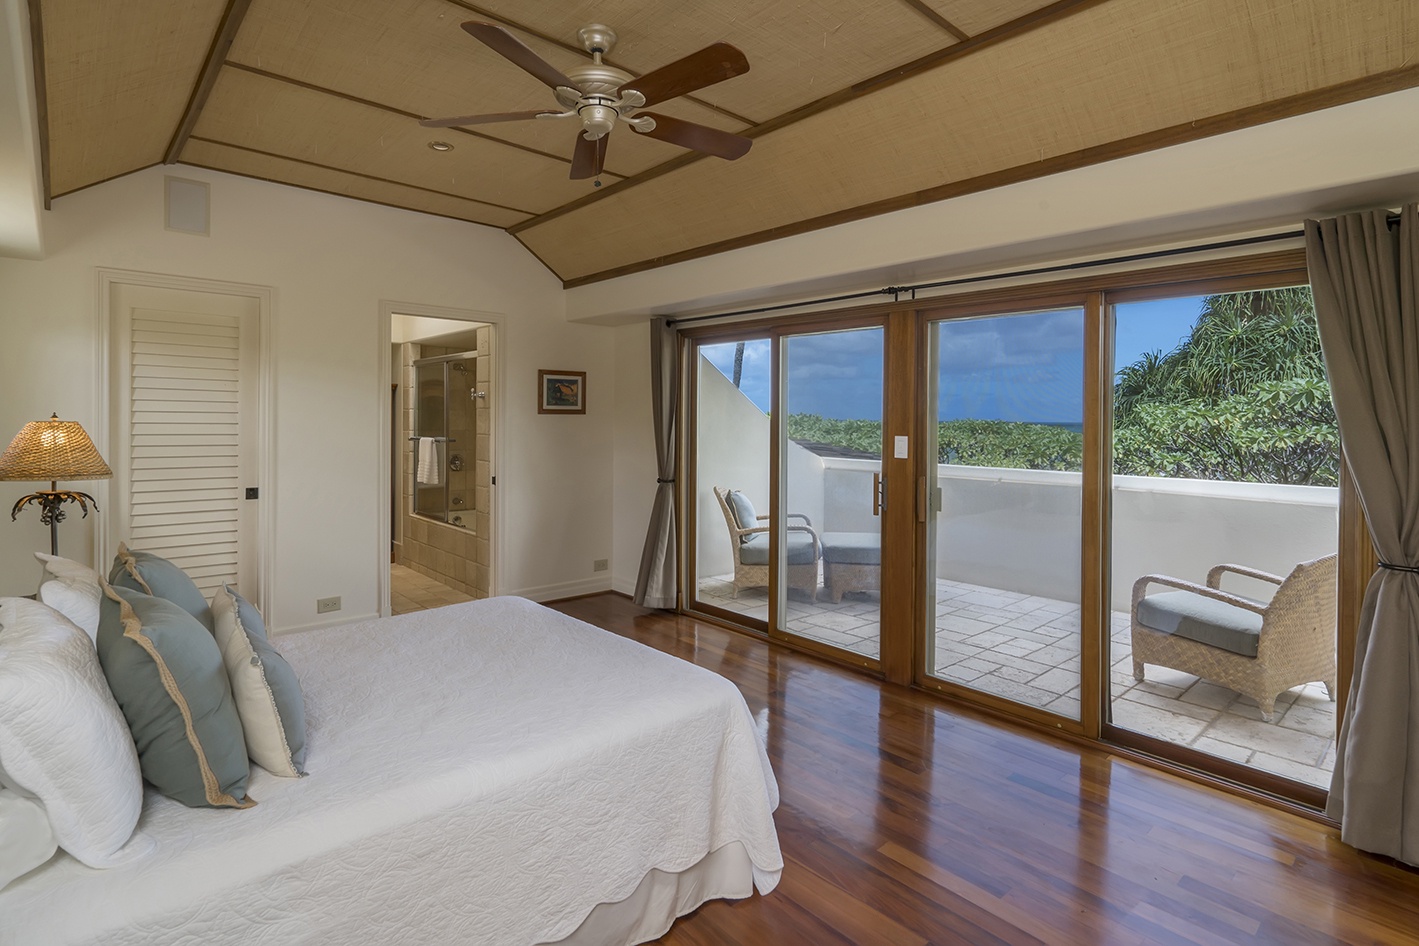 Kailua Vacation Rentals, Kailua's Kai Moena Estate - Guest house: Guest Bedroom 3 with split A/C located upstairs.  Spiral staircase is very tight. Queen Bed.